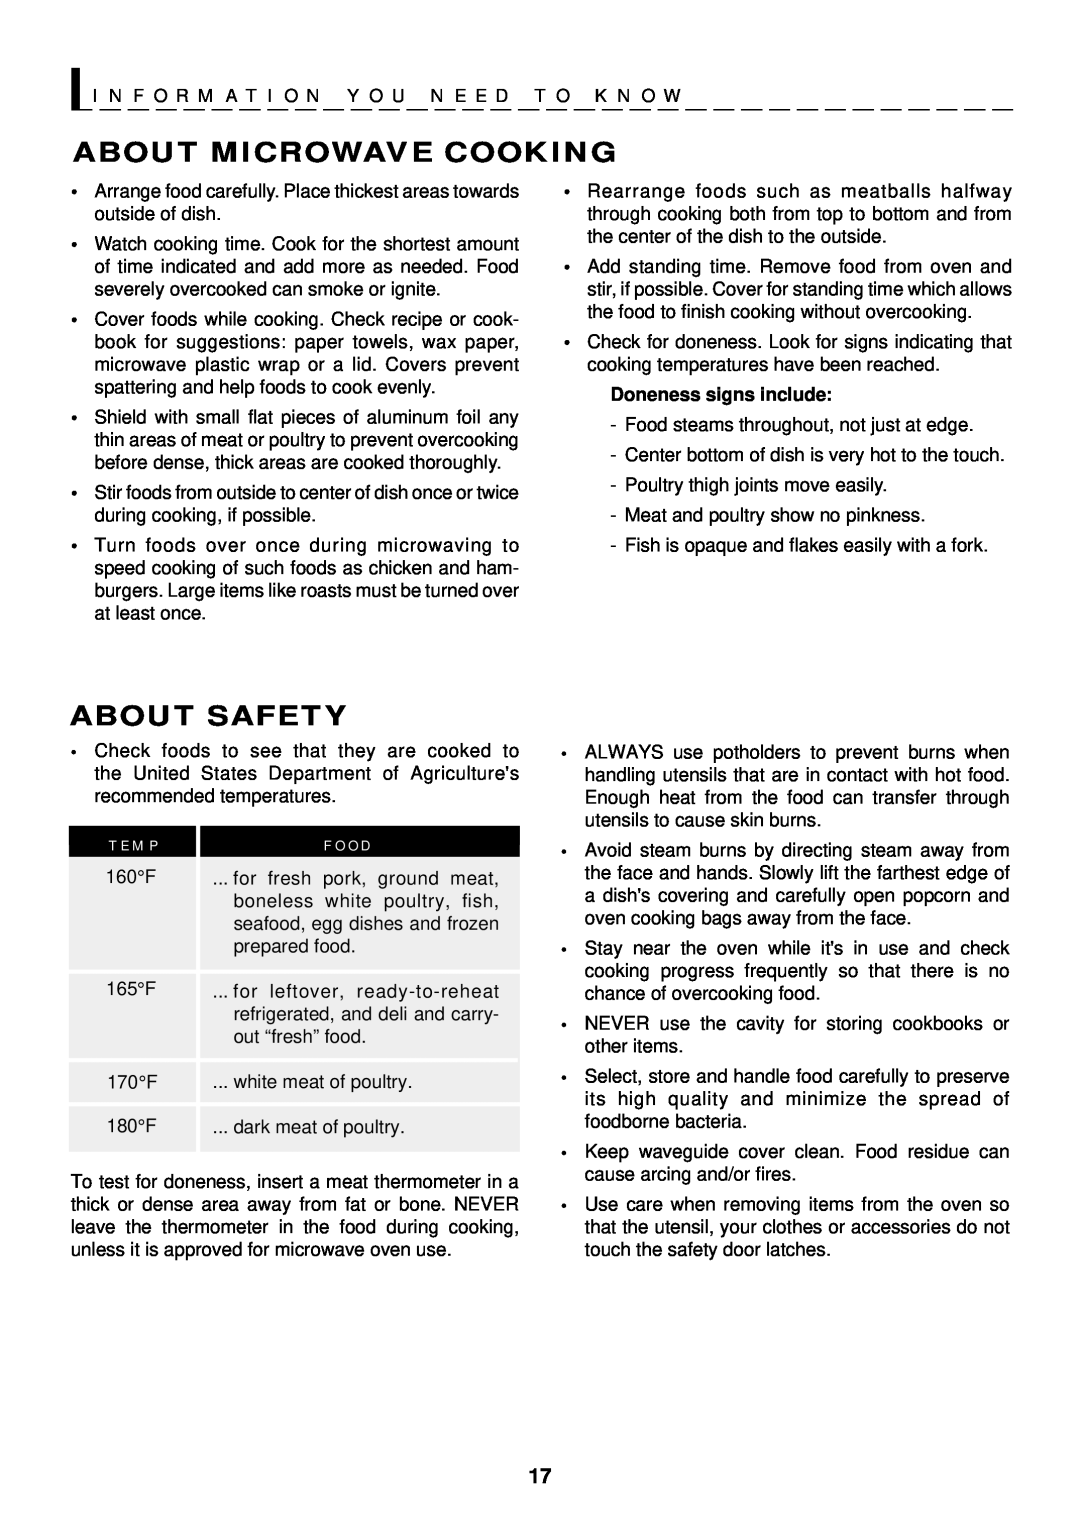 Sharp R-1501 About Microwave Cooking, About Safety, T E M P, F O O D, I N F O R M A T I O N Y O U N E E D T O K N O W 